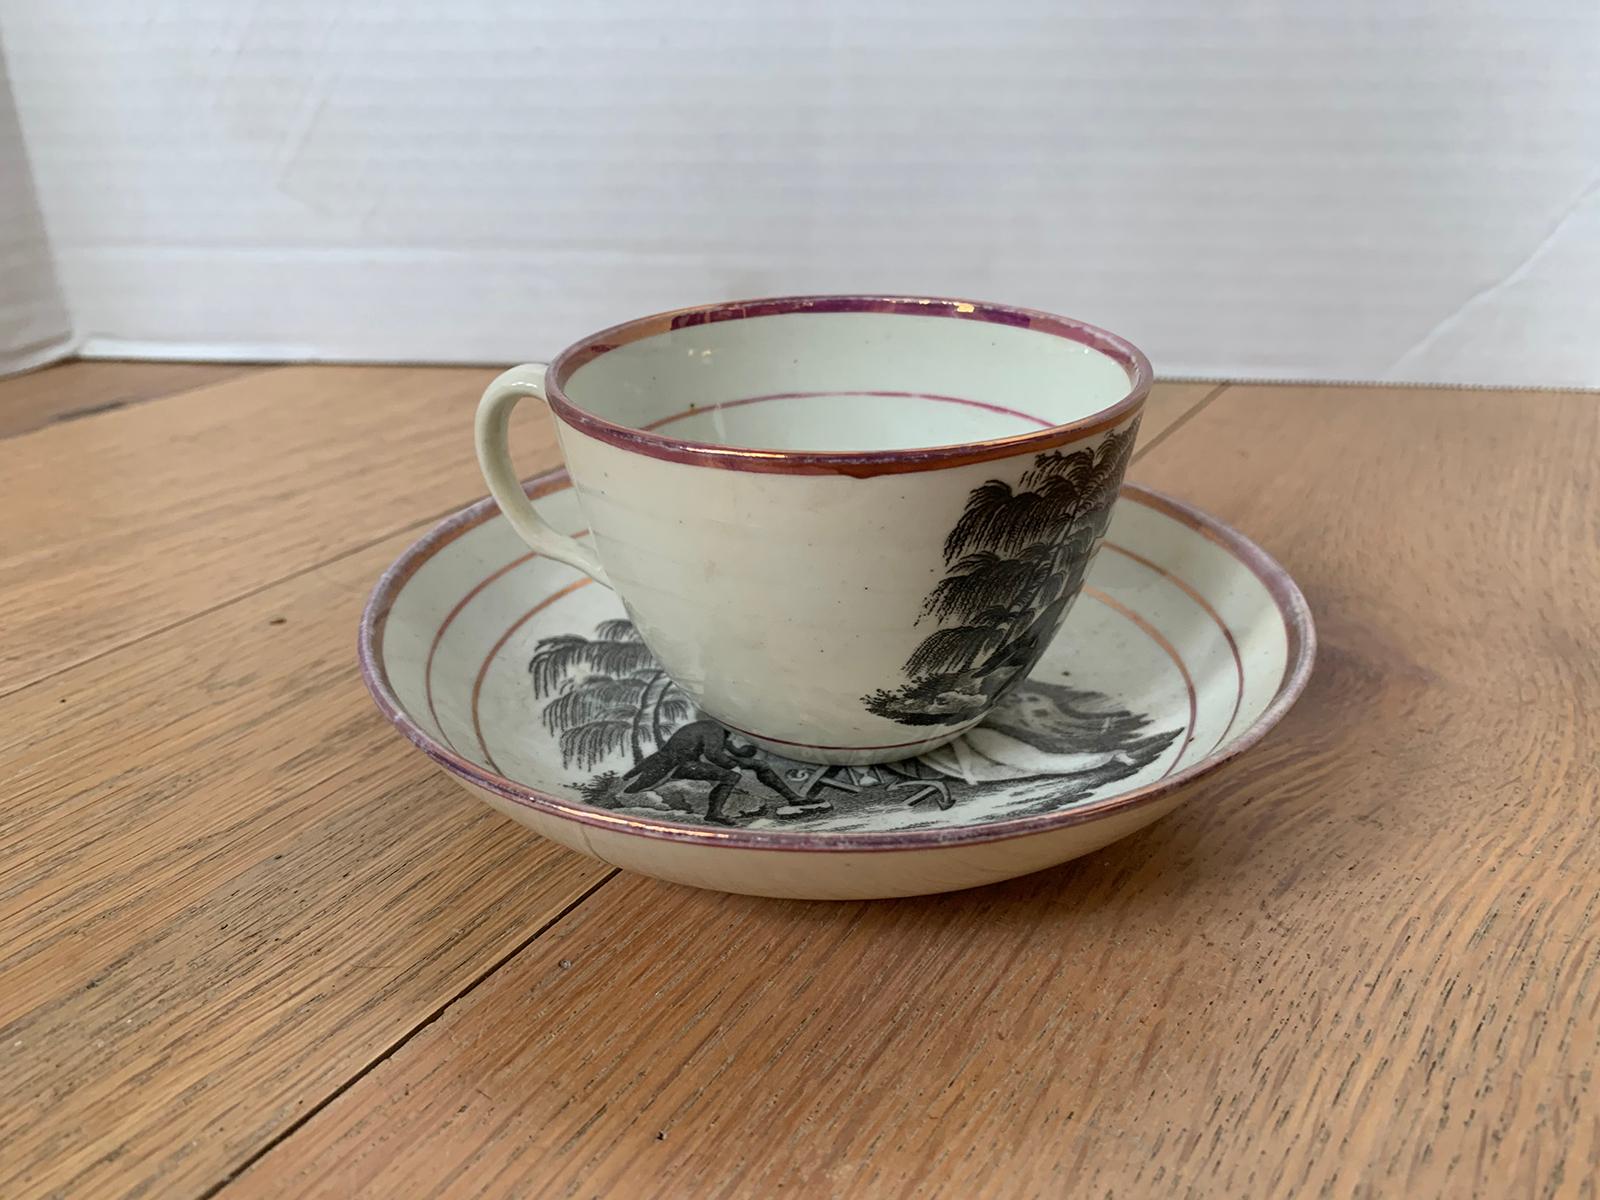 19th century English black transfer and pink luster ware tea cup and saucer
Measures: Cup 4.25